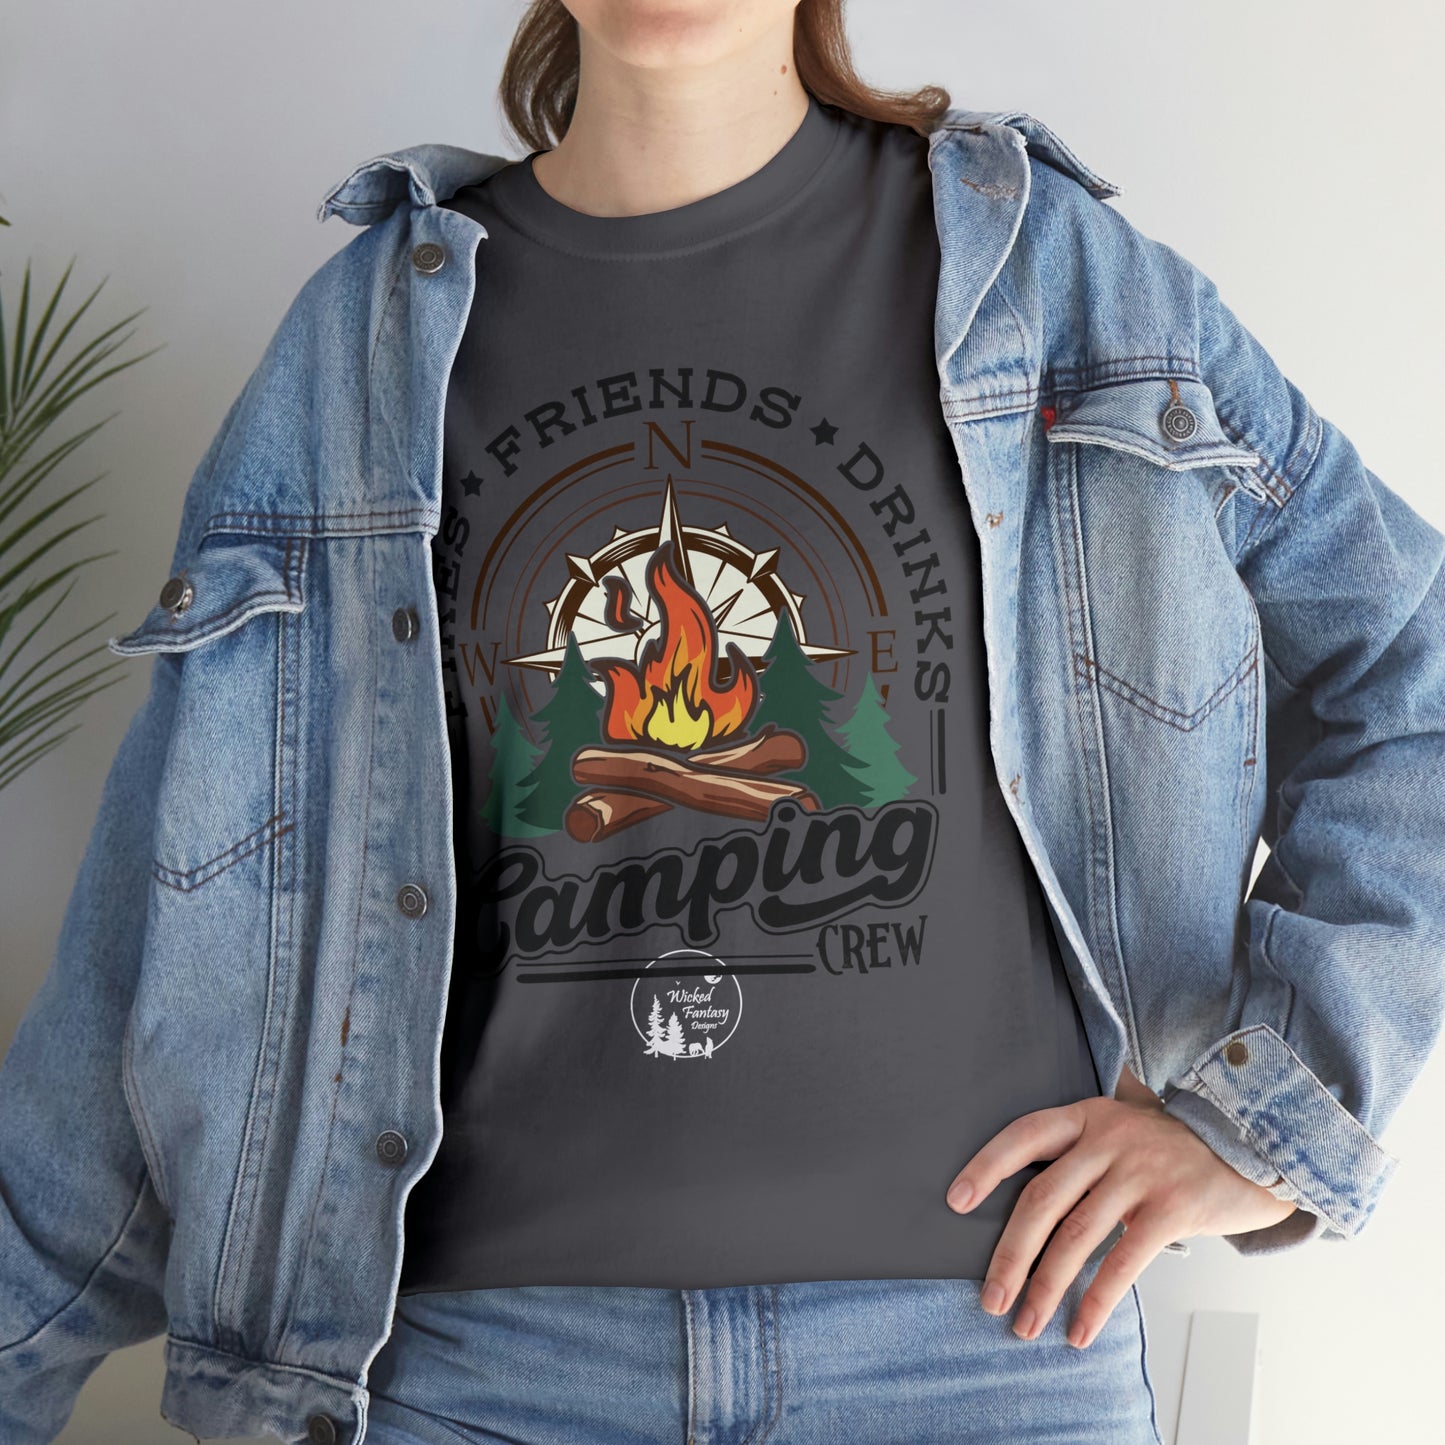 Camping Crew Fires Friends Drinks Outdoors Heavy Cotton Tee